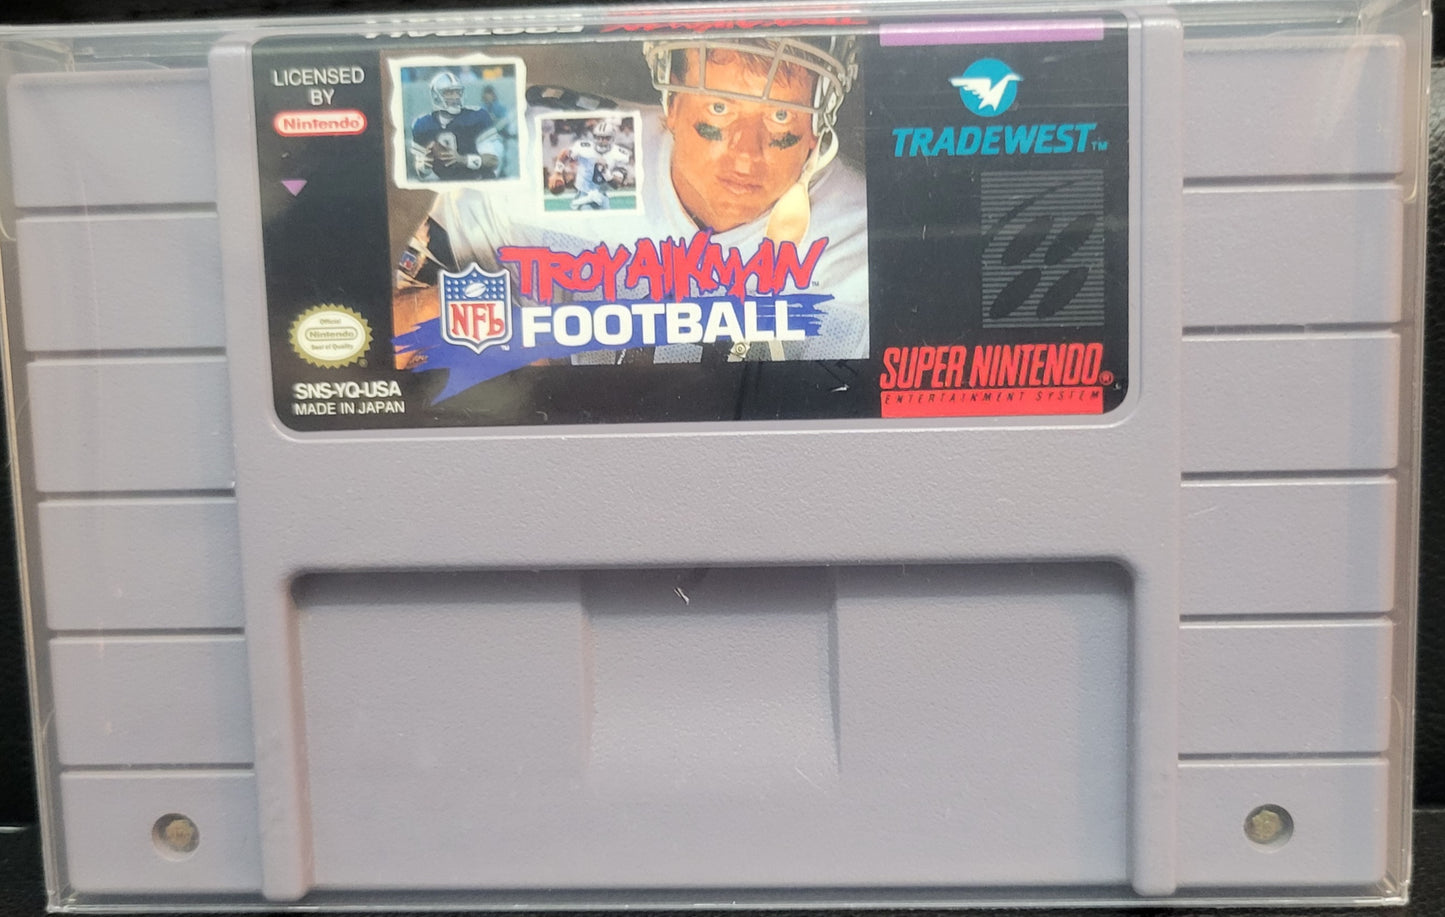 1994 Troy Aikman FOOTBALL SNES Authentic Cartridge (Super Nintendo Entertainment System) Classic Arcade Game Great Original Condition + Protector